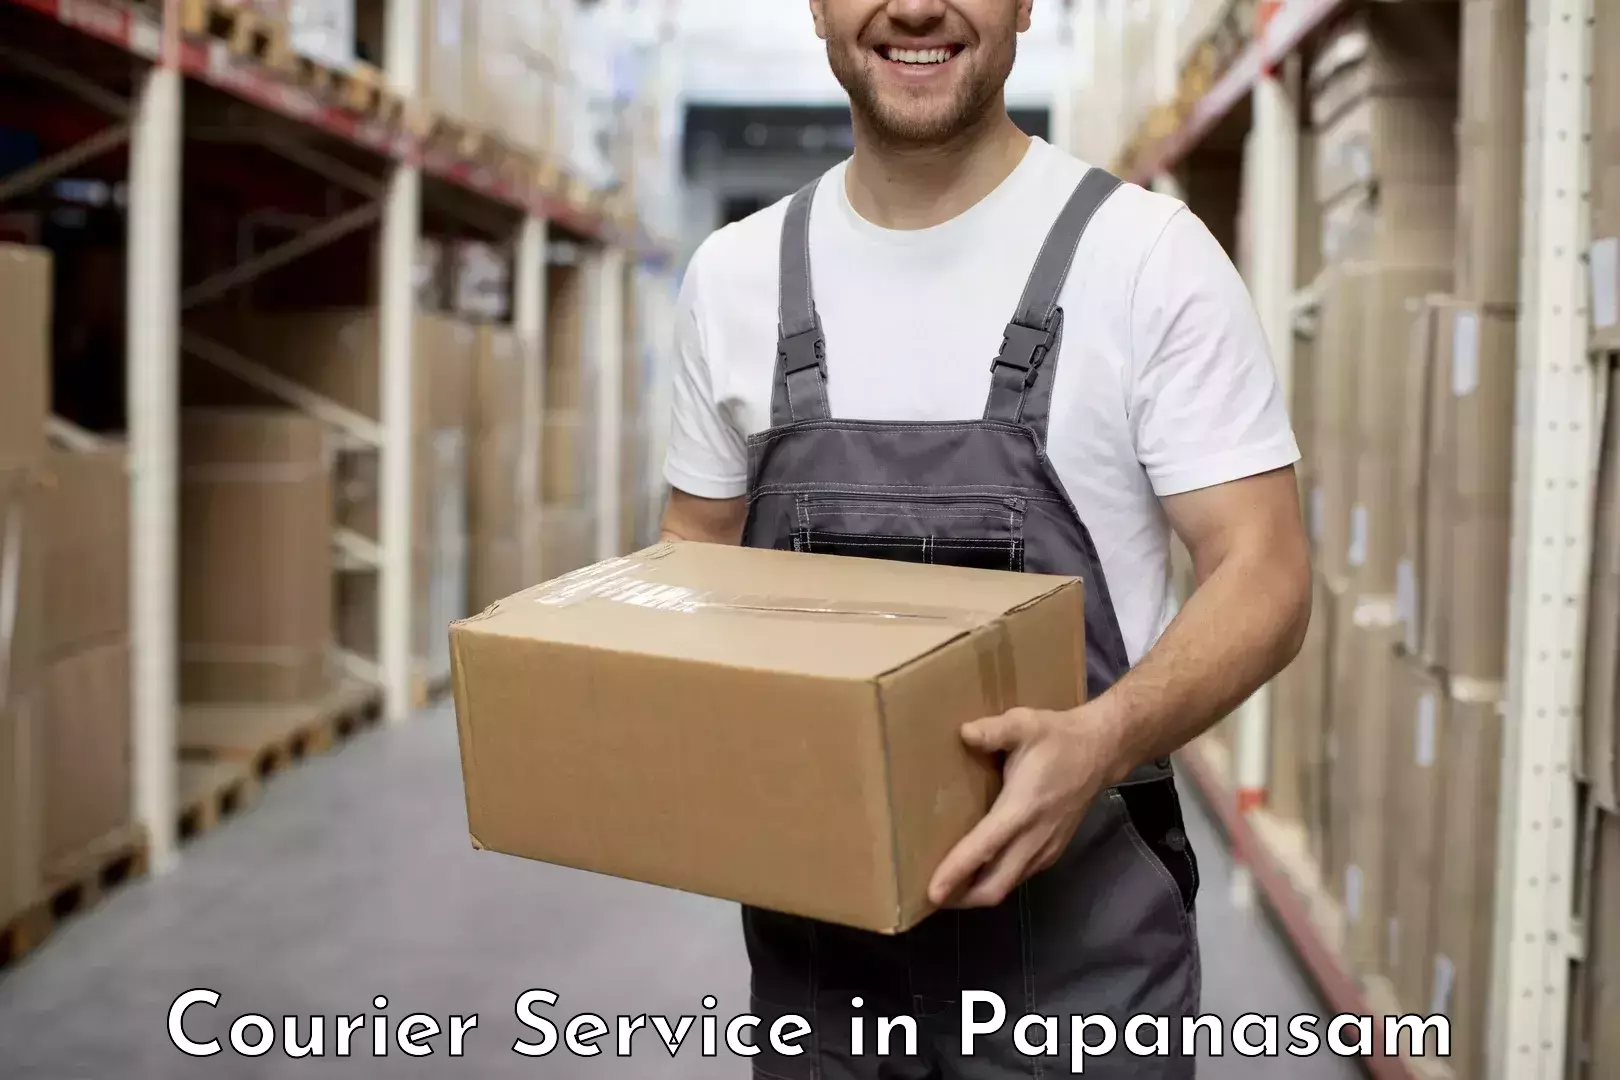 Expedited parcel delivery in Papanasam